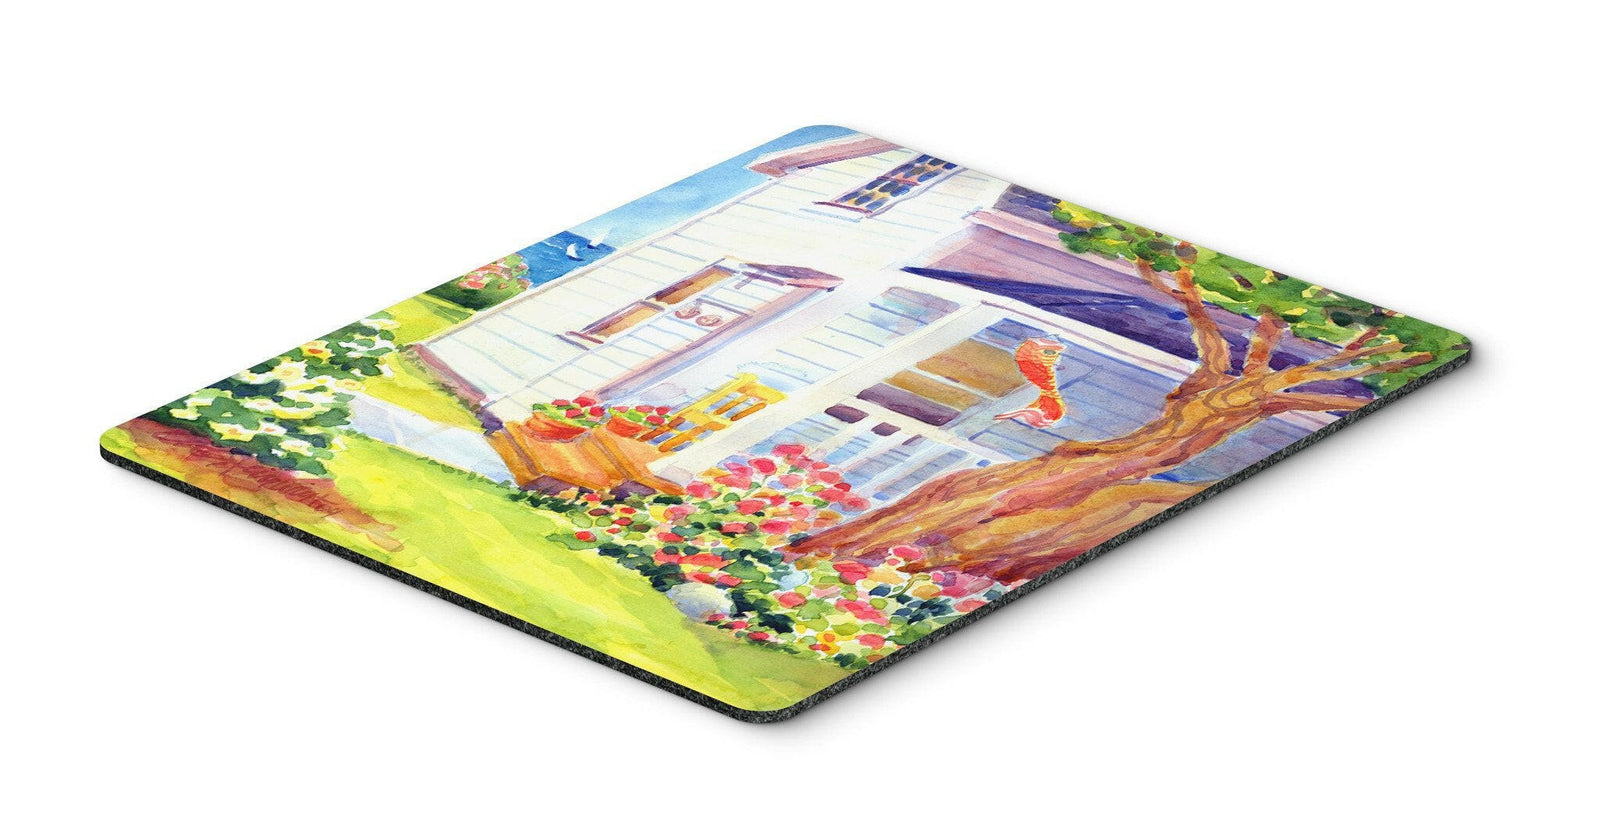 White Cottage House at the lake or Beach Mouse Pad, Hot Pad or Trivet by Caroline's Treasures